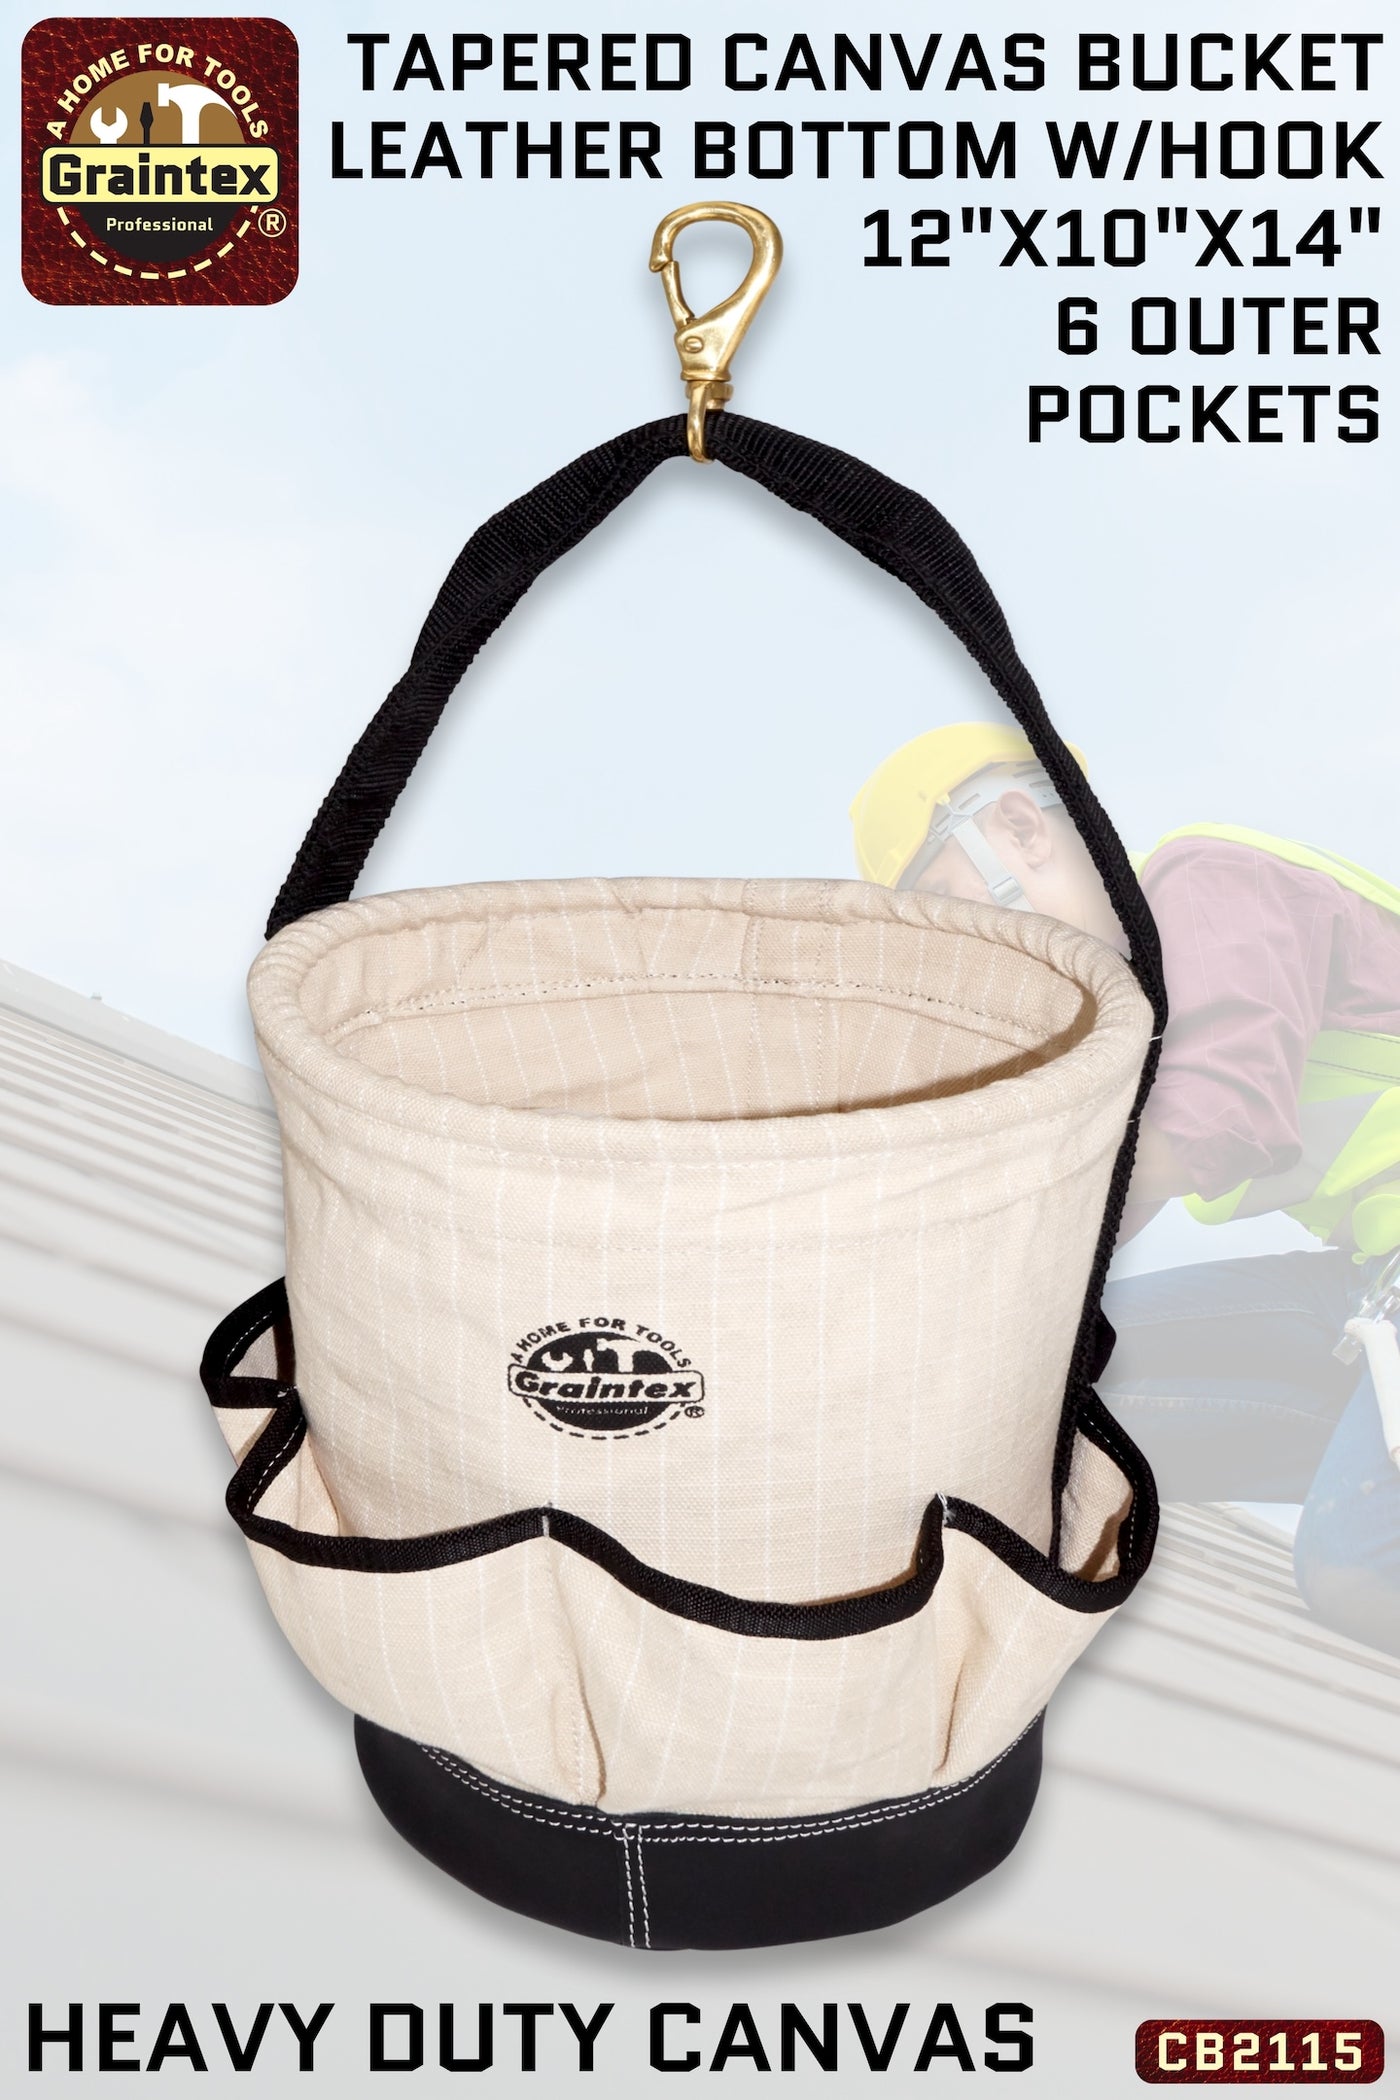 CB2115 :: UTILITY TAPERED CANVAS BUCKET LEATHER BOTTOM 6 OUTER POCKETS 12”X10”X14” WEBBING HANDLE WITH SWIVEL SNAP HOOK